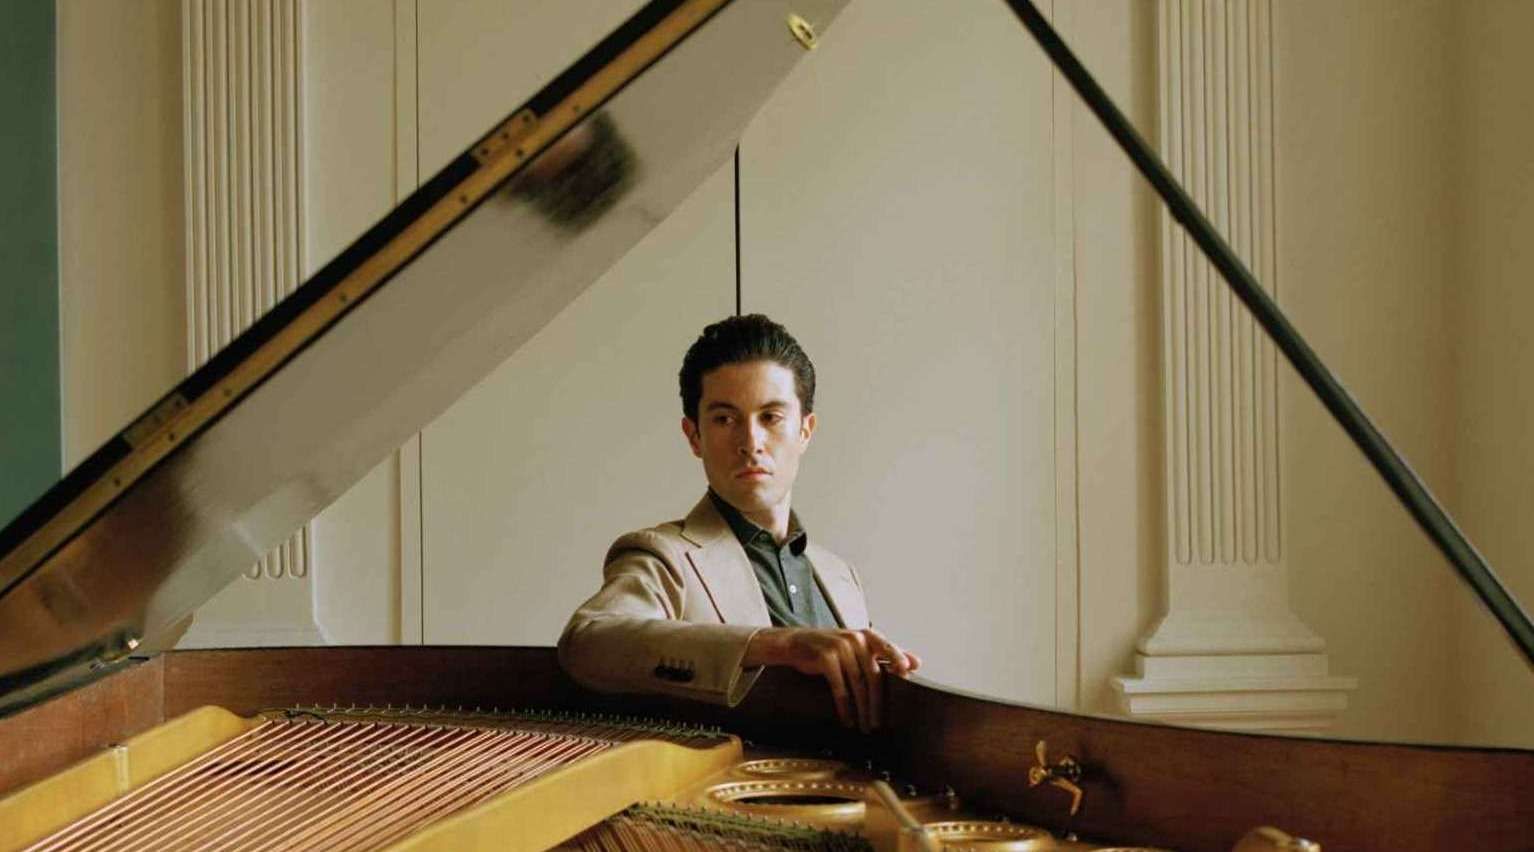 National pianist to perform mugham music in Moscow